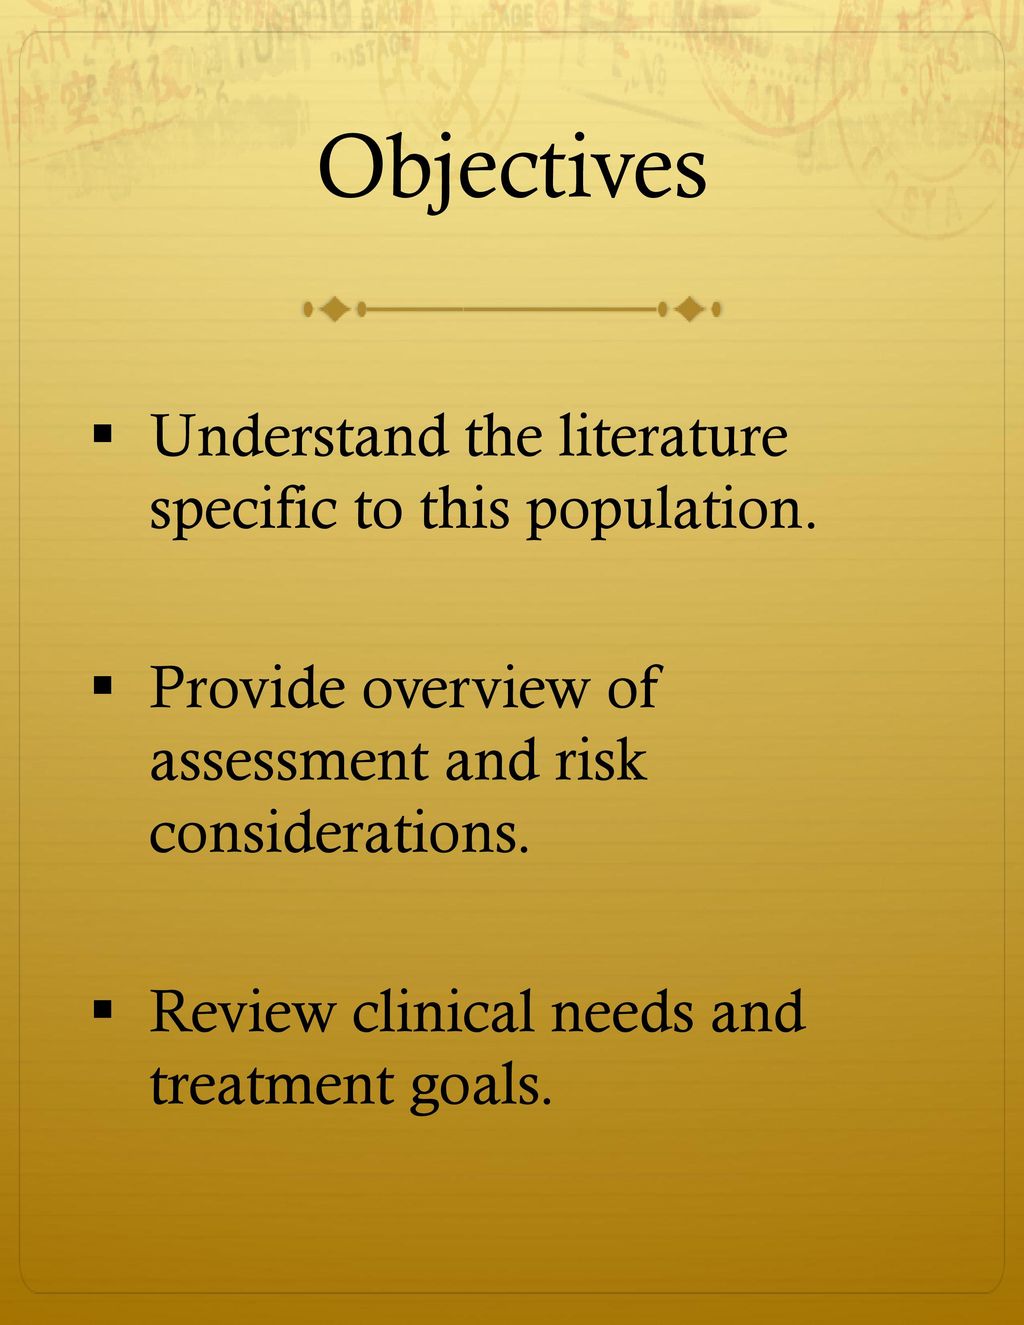 Objectives Understand the literature specific to this population.